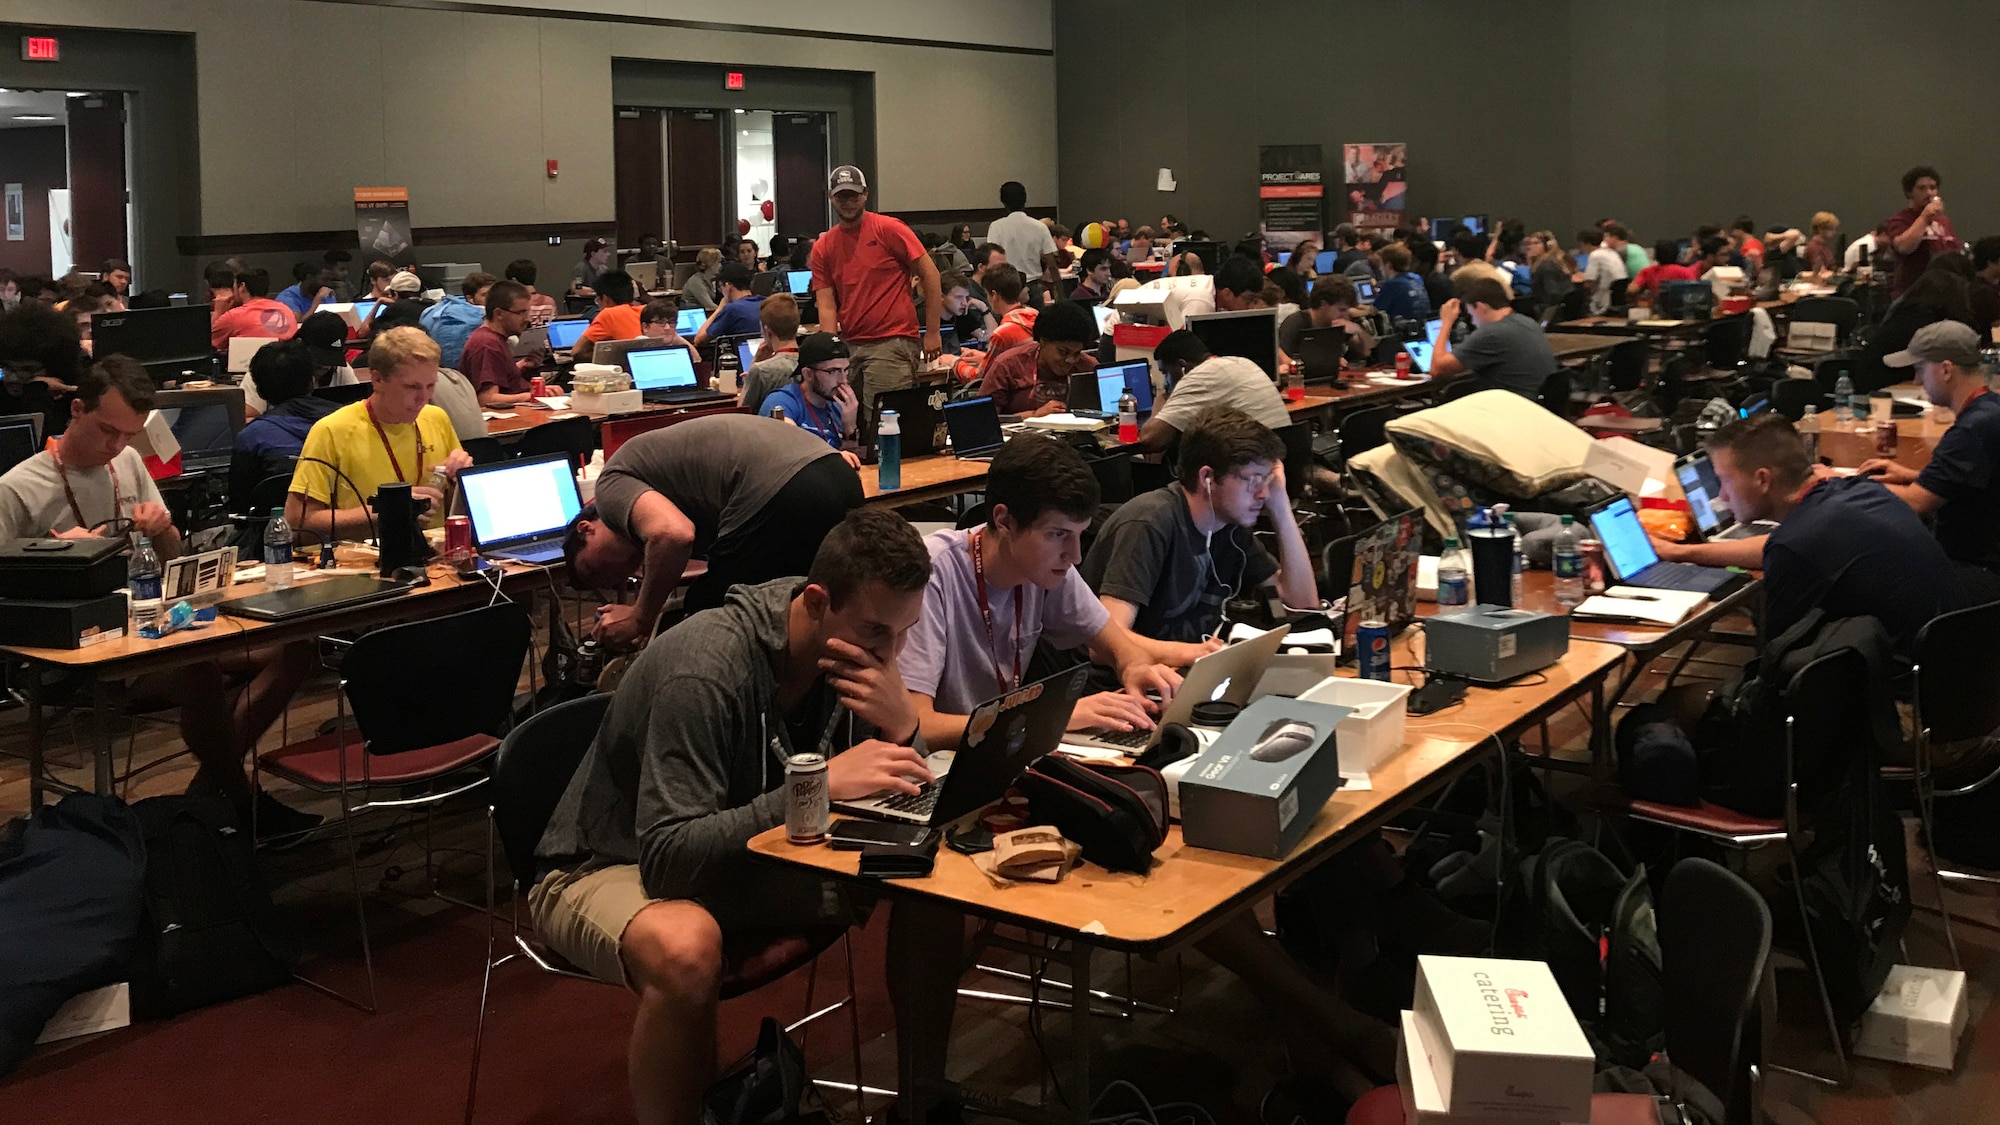 HackState participants work on their projects Sept. 23, 2017, at Mississippi State University in Starkville, Mississippi. Teams competed against each other in different categories to create the best programs and potentially win prizes. Three Airmen from the 81st Training Support Squadron at Keesler Air Force Base, Mississippi, competed and won first place for the best safety hack. (Courtesy photo